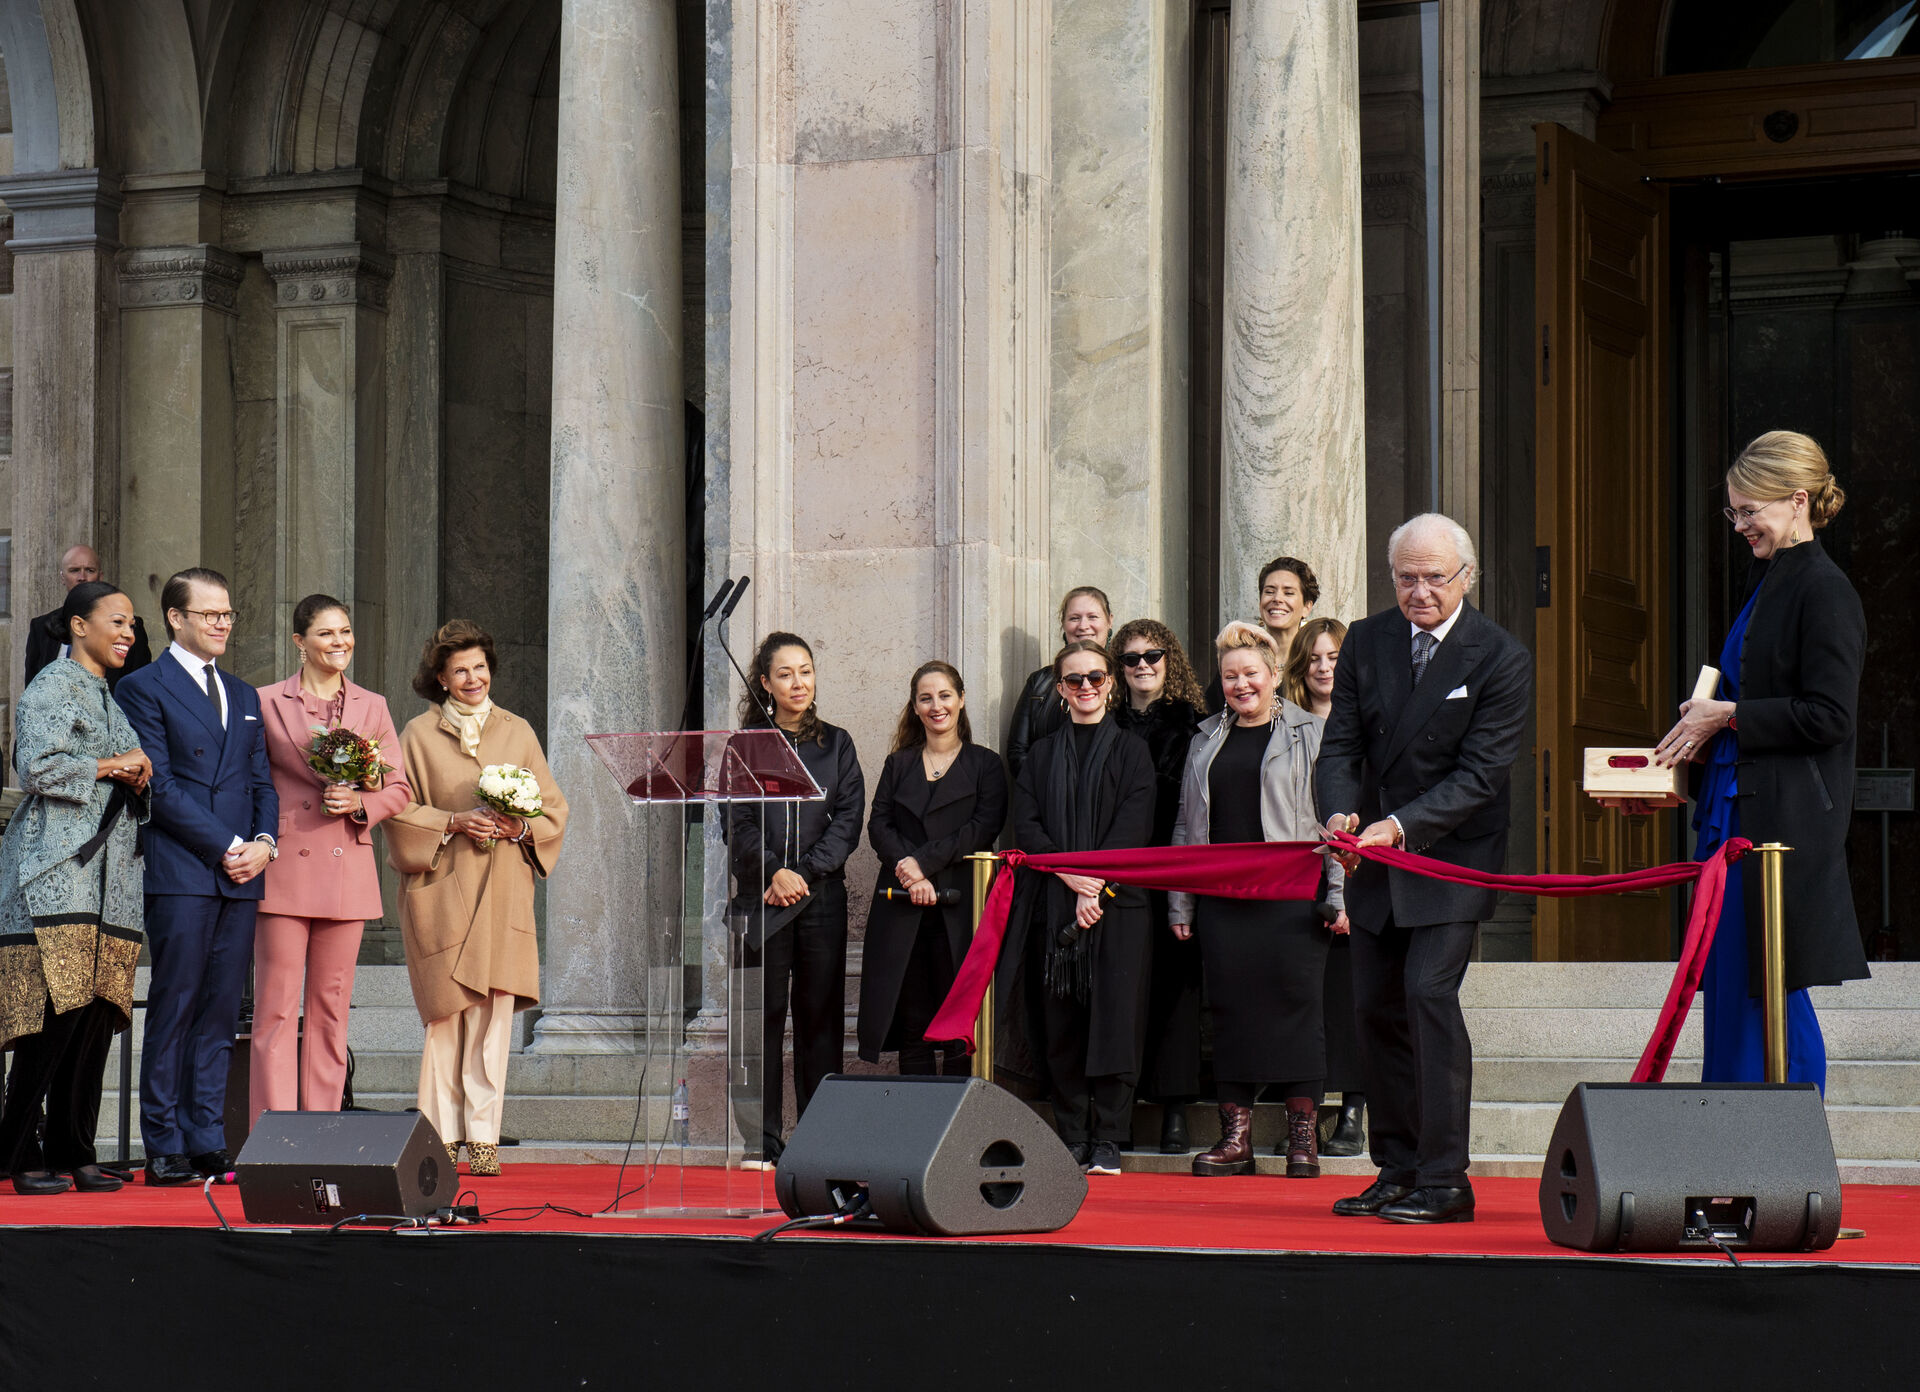 HM King Carl of Sweden cutting the red ribbon